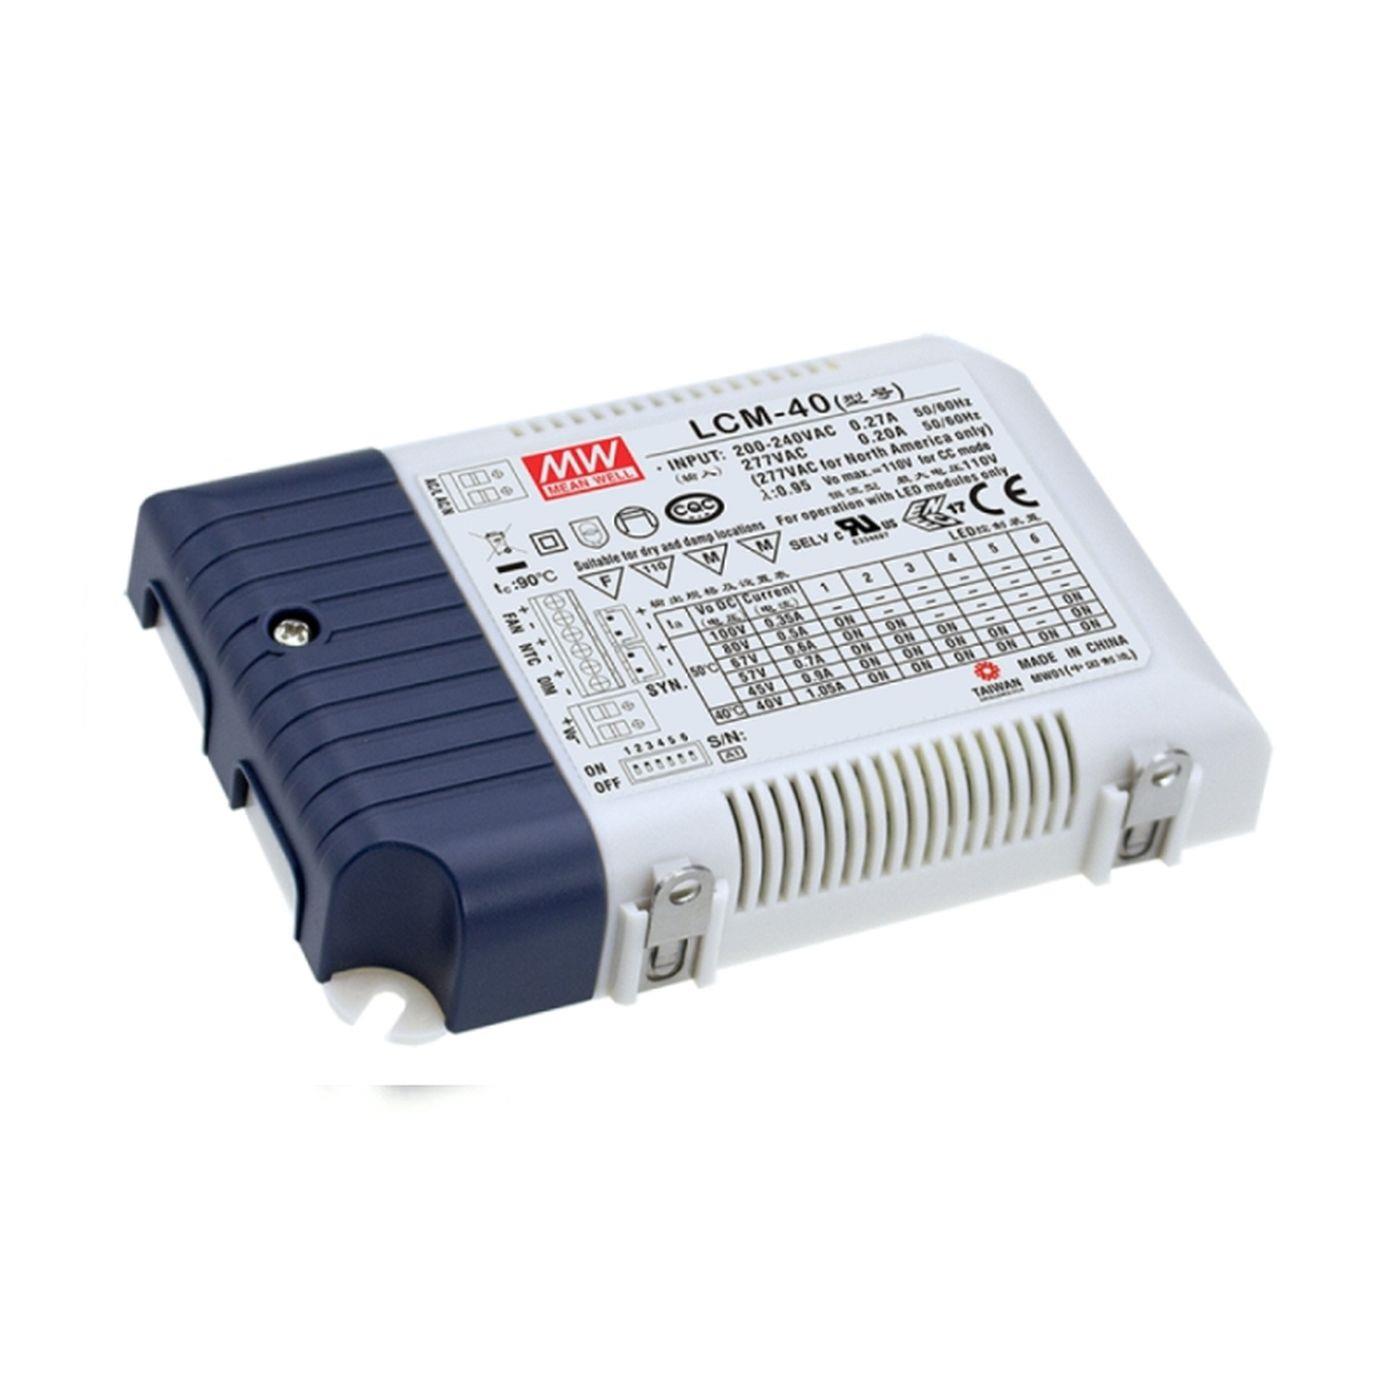 LCM-40 42W 0-10V Dimmable Constant current LED power supply Driver Transformer 350 500 600 700 900 1050 1400mA